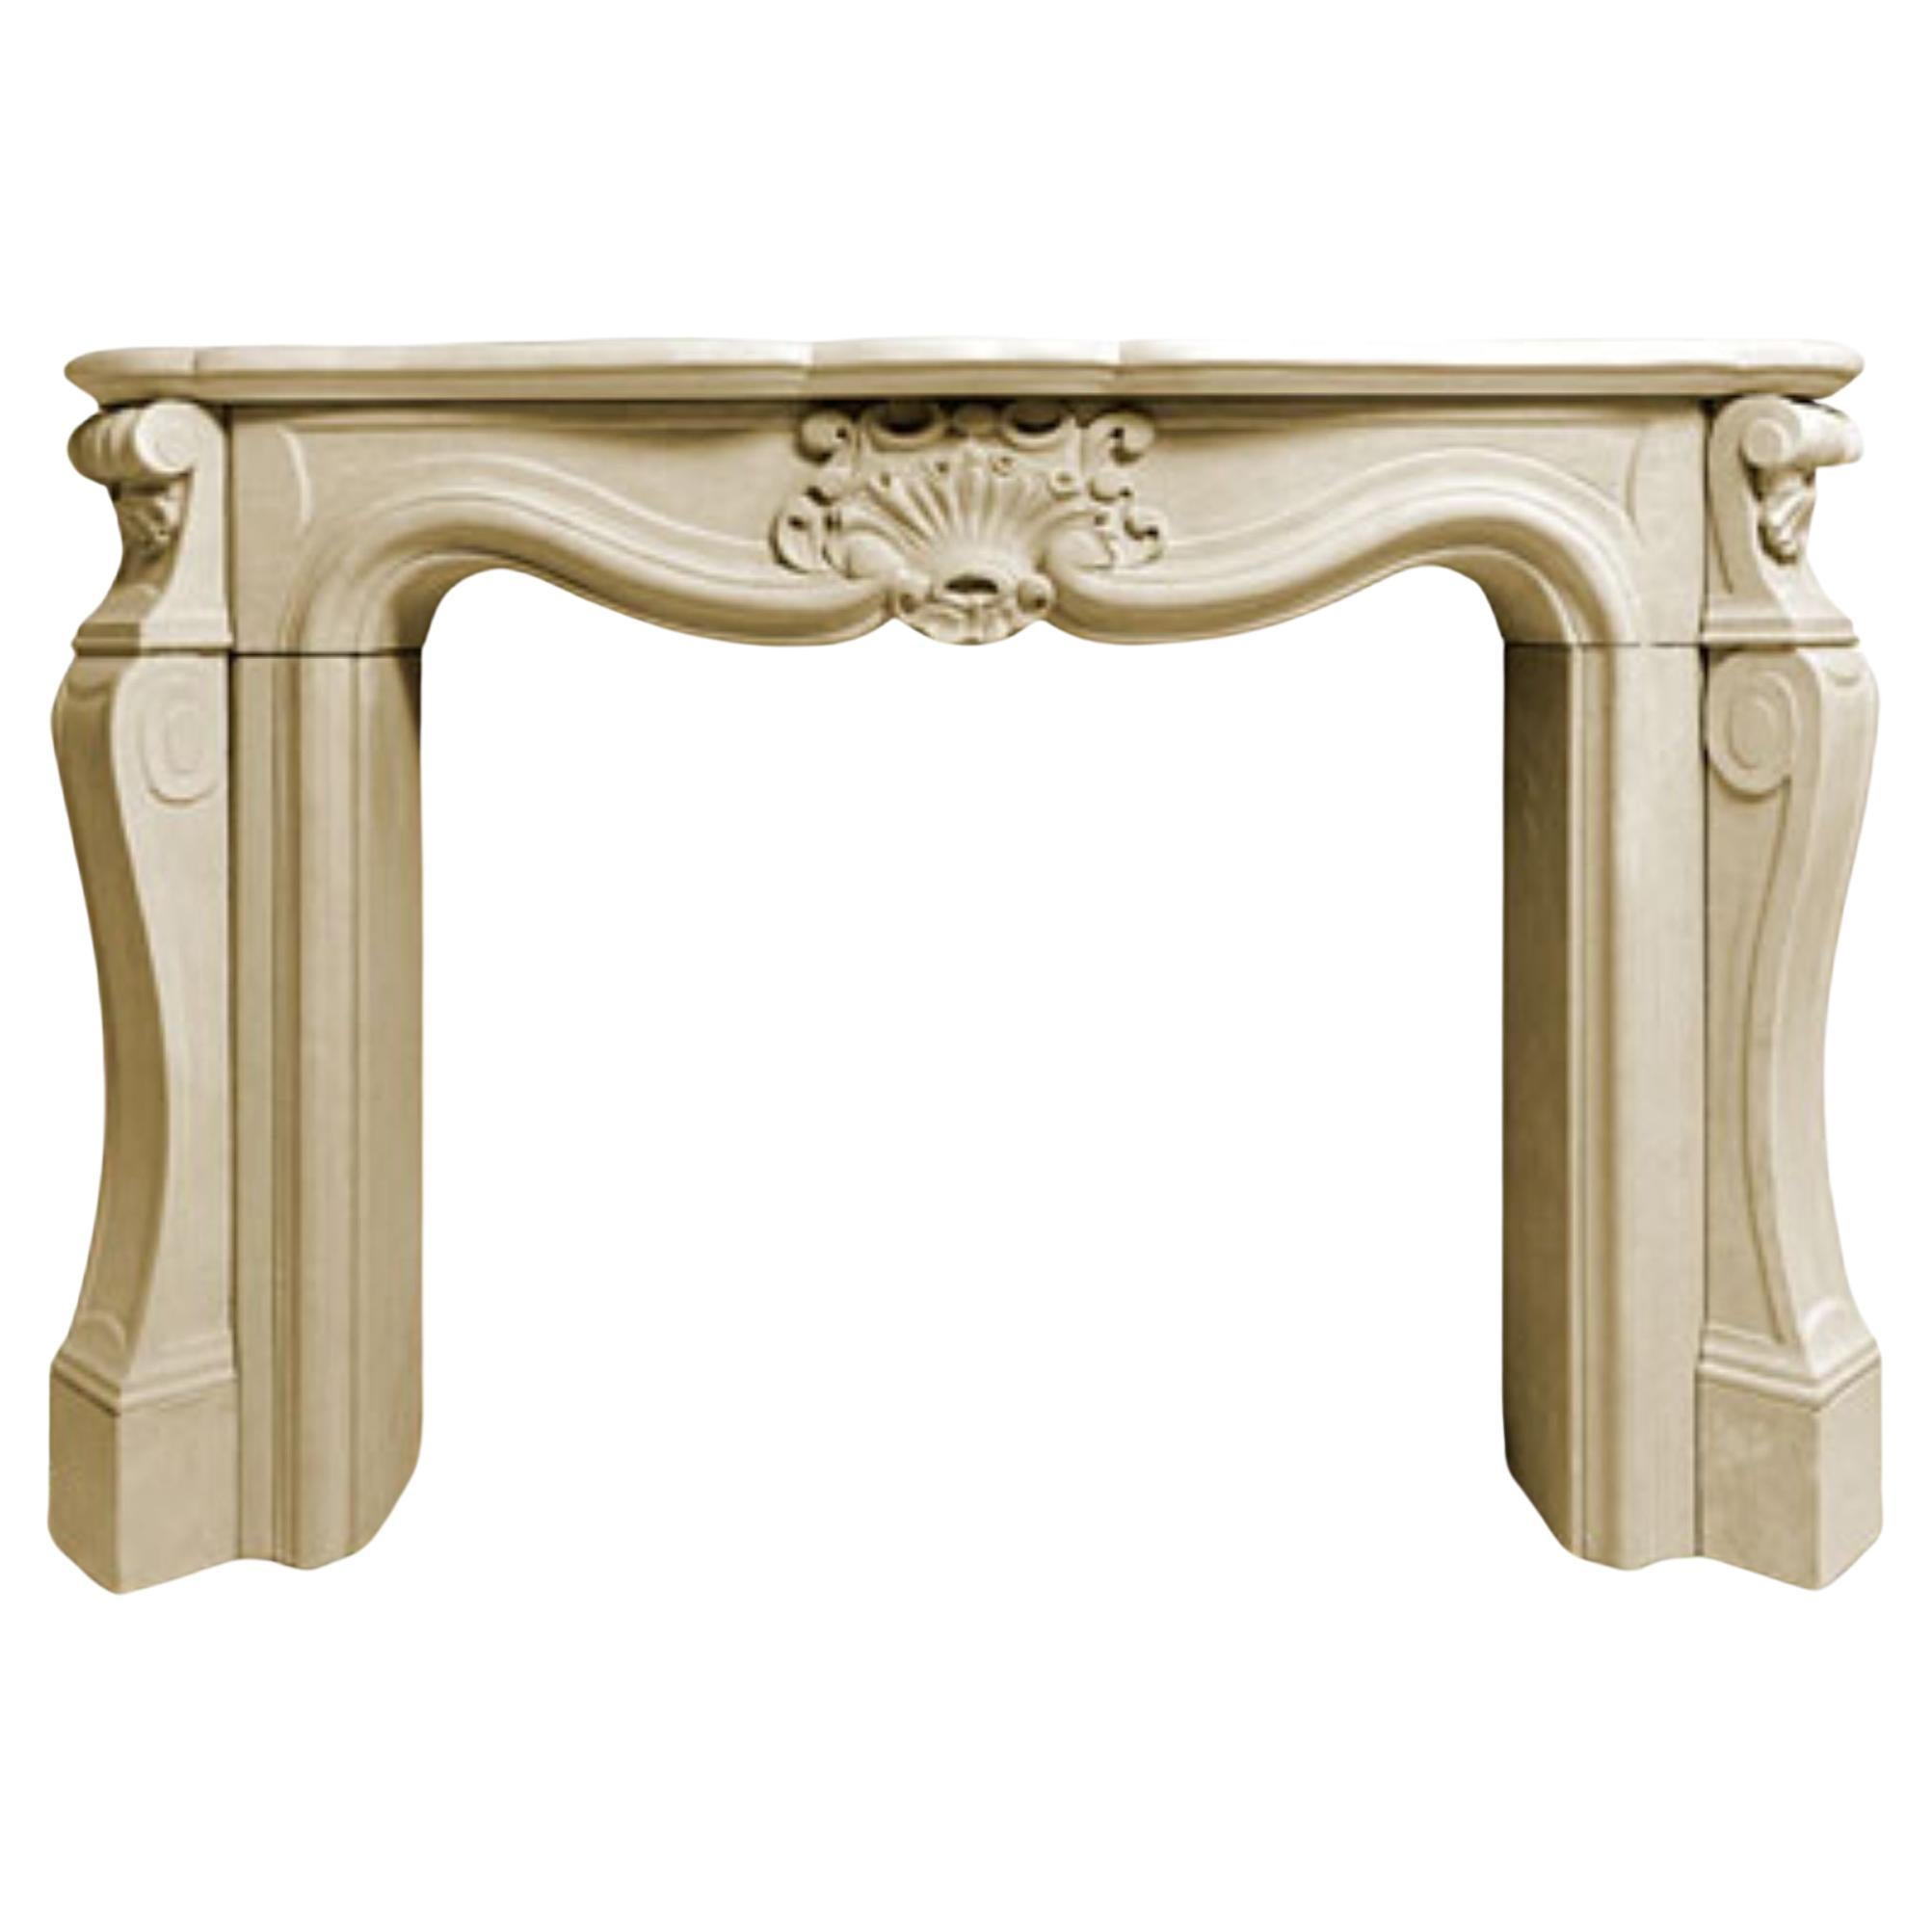 The Louis XV: A Classic French Stone Fireplace Evoking the Era of King Louis XV For Sale